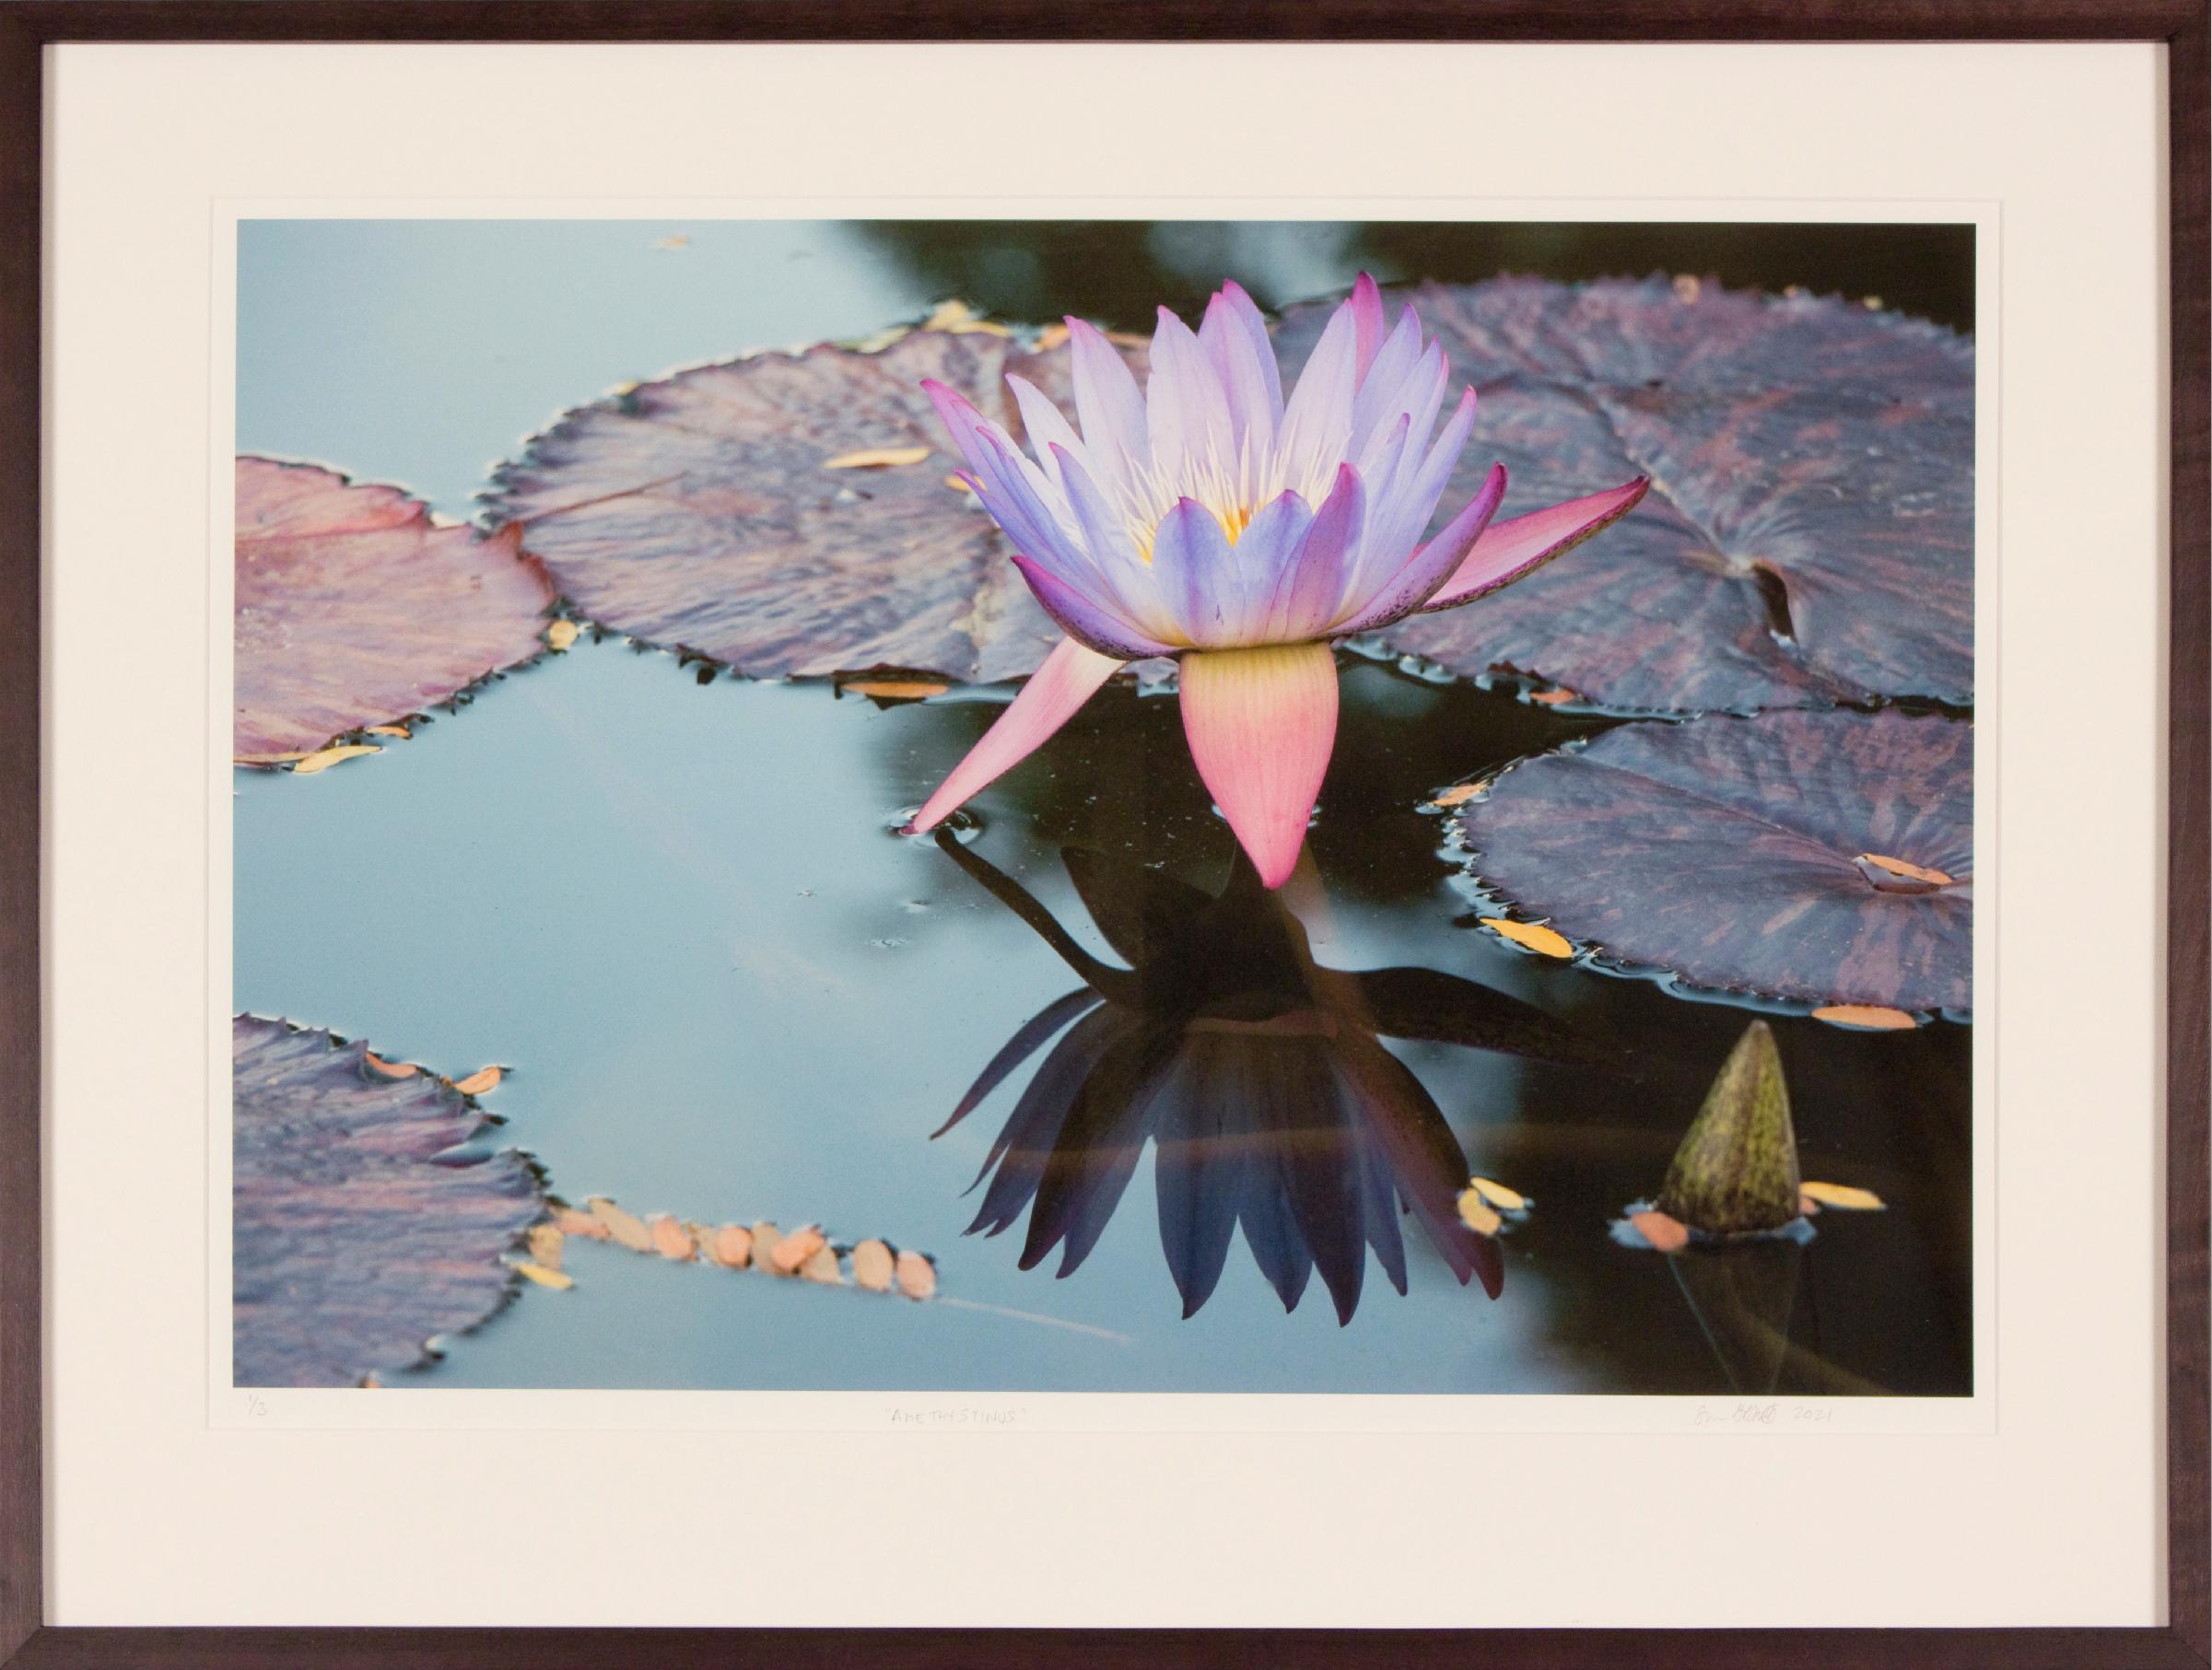 AMETHYSTINUS - Floral Art Photography / Water Lily Reflections / Botanic Garden